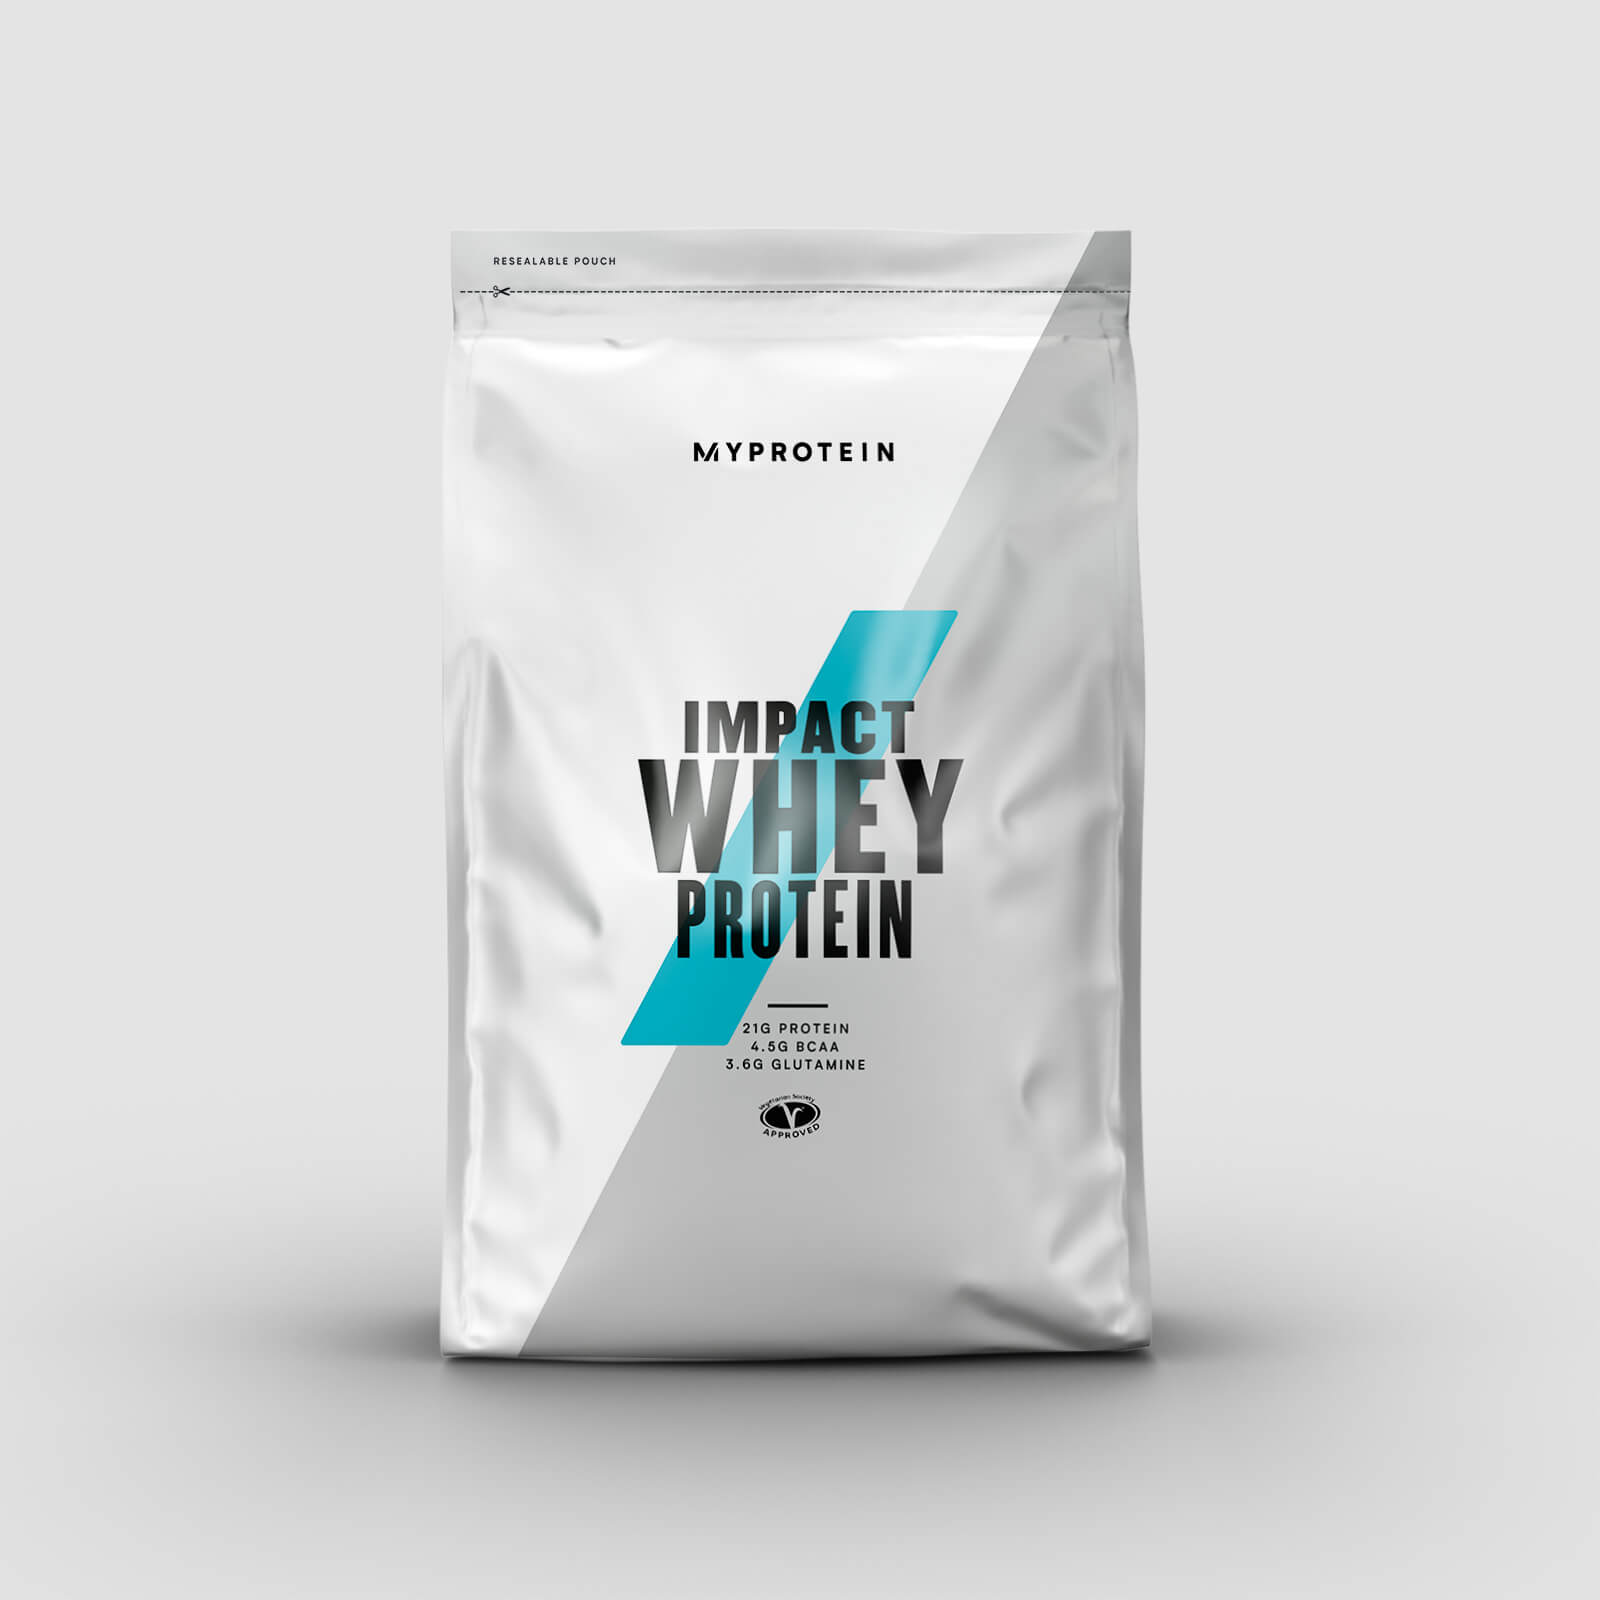 Myprotein Vassleprotein - Impact Whey Protein - 1kg - Chocolate Coconut - New and Improved